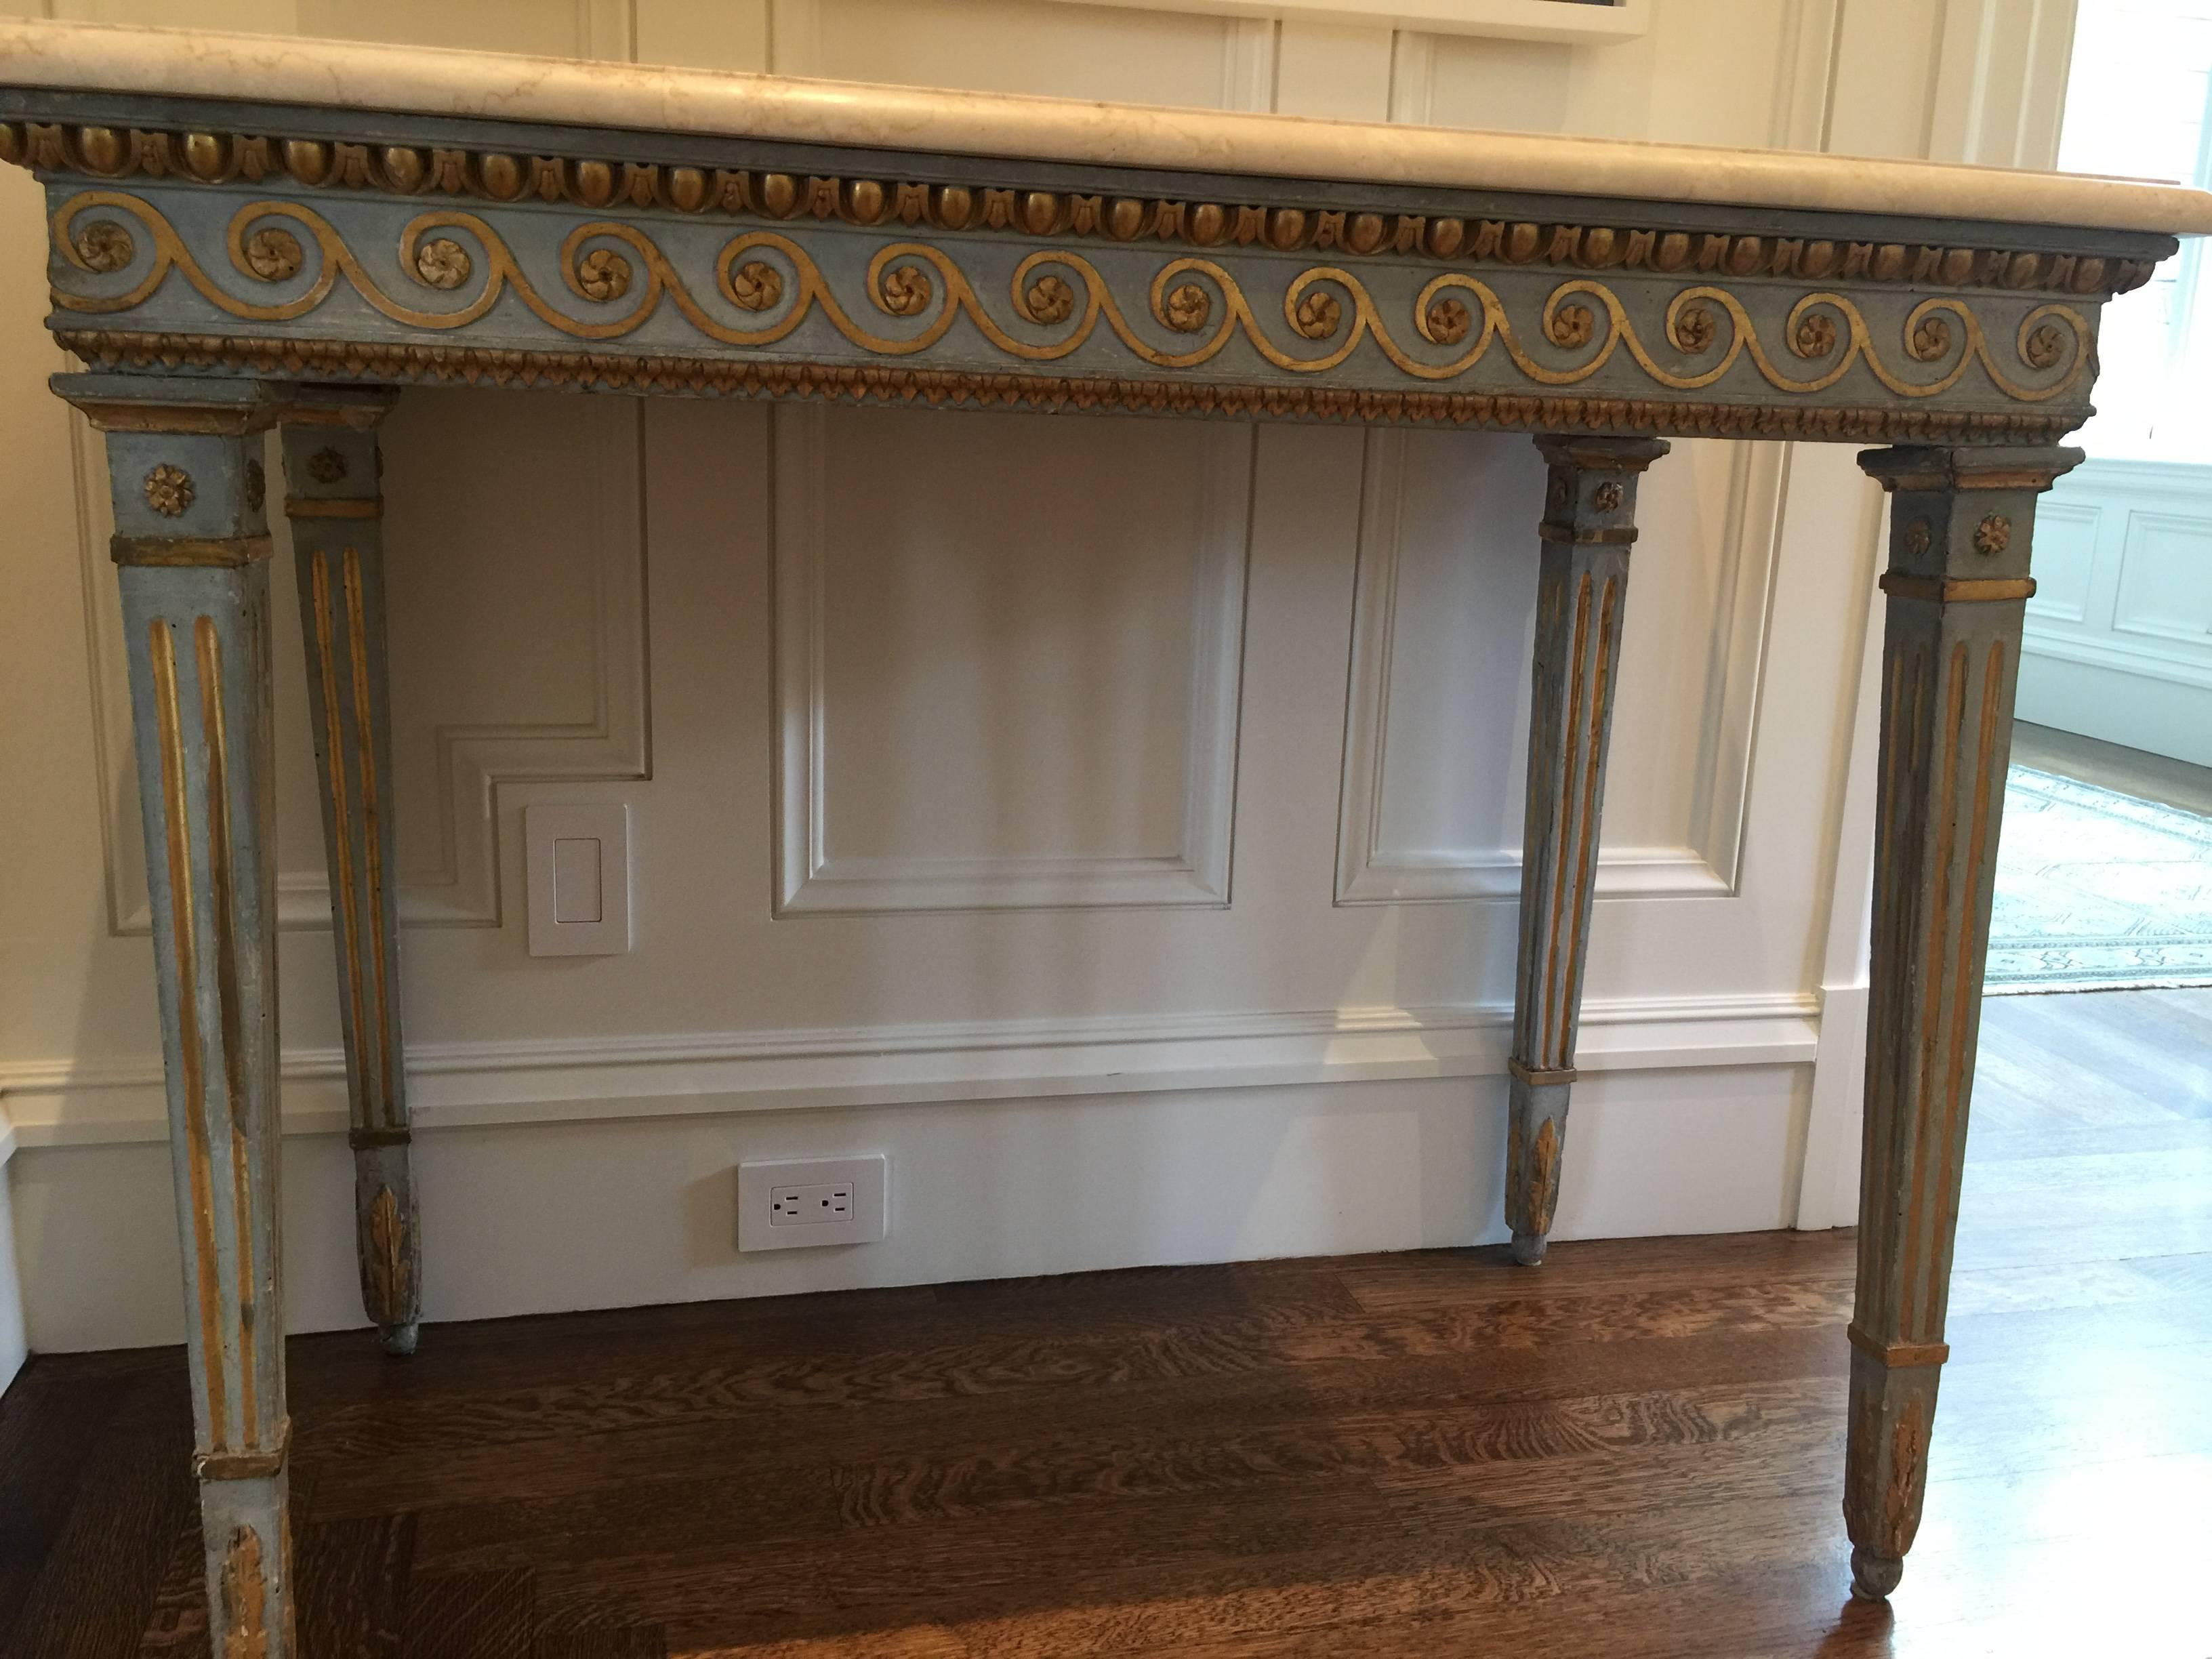 18th century hand-carved polychrome and giltwood Gustavian console table with marble top.
The apron carved with wave motifs with bead moldings top and bottom. The tapered fluted legs with banded rosettes and acanthus detailing on the